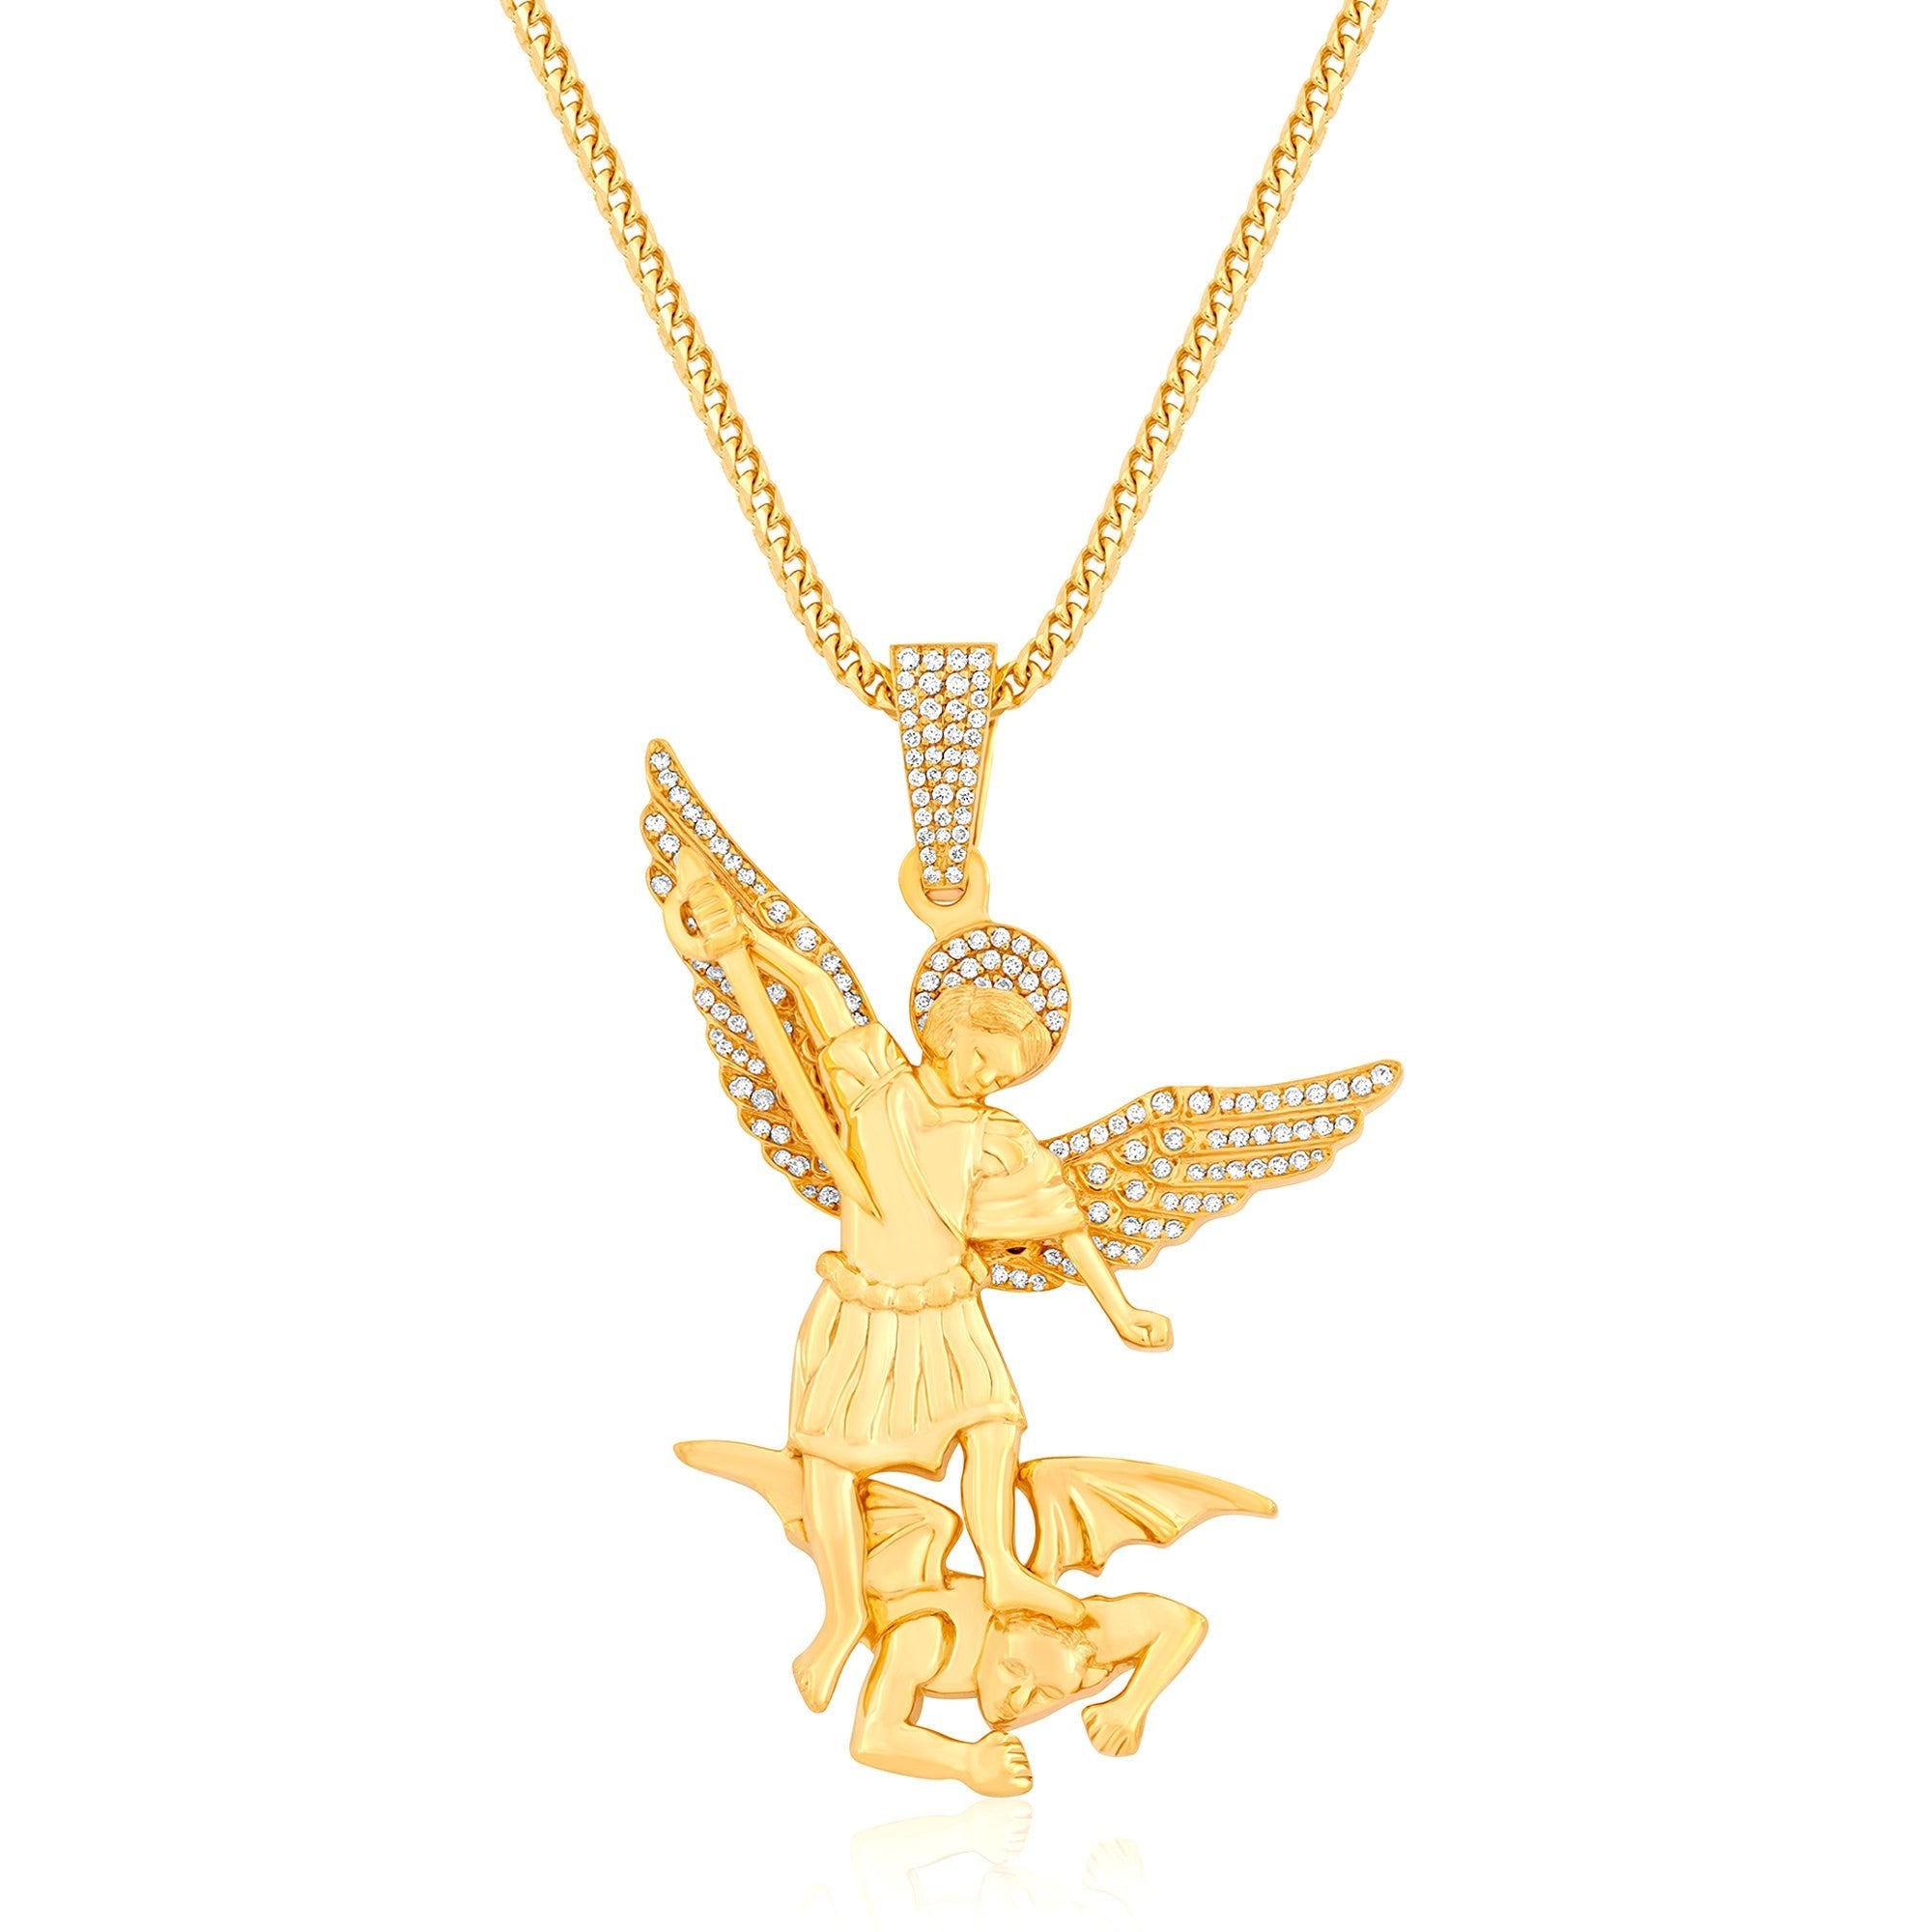 Pendants - Baby Saint Michael Arch Angel Piece (Partially Iced) - ifandco.com